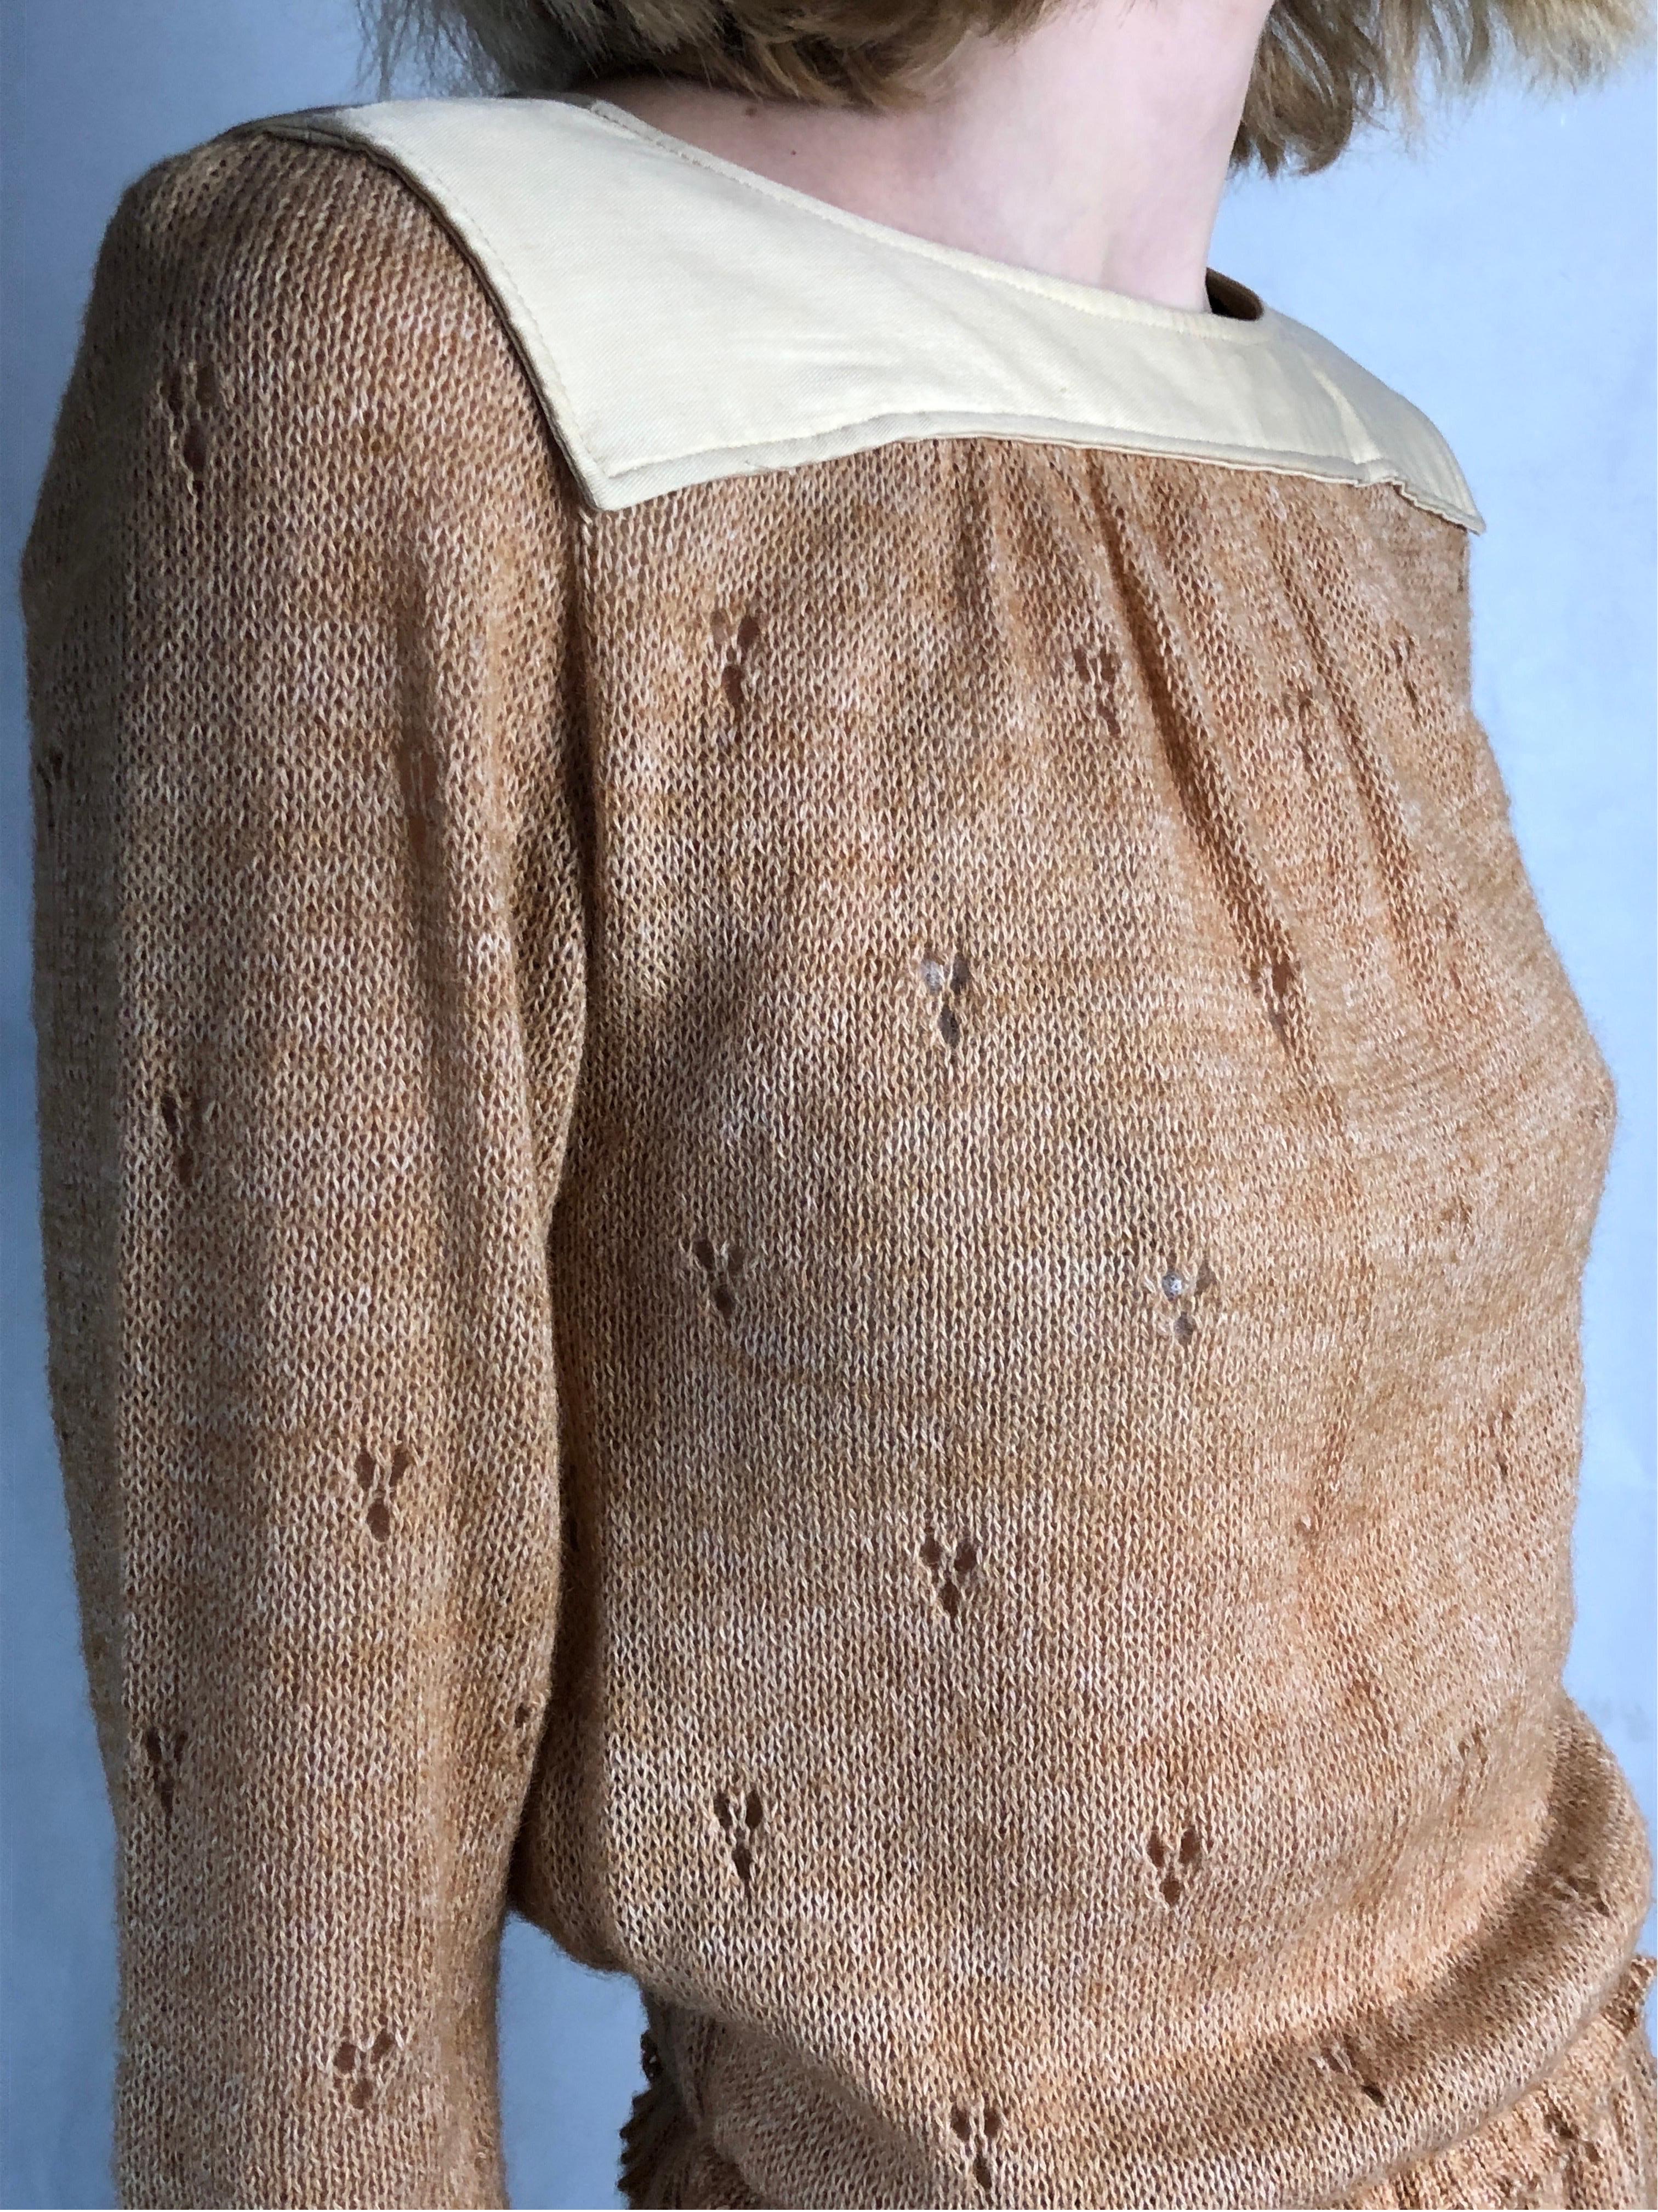 Women's Courreges  mohair Pointelle jersey dress with floral patterns, circa 1970s    For Sale